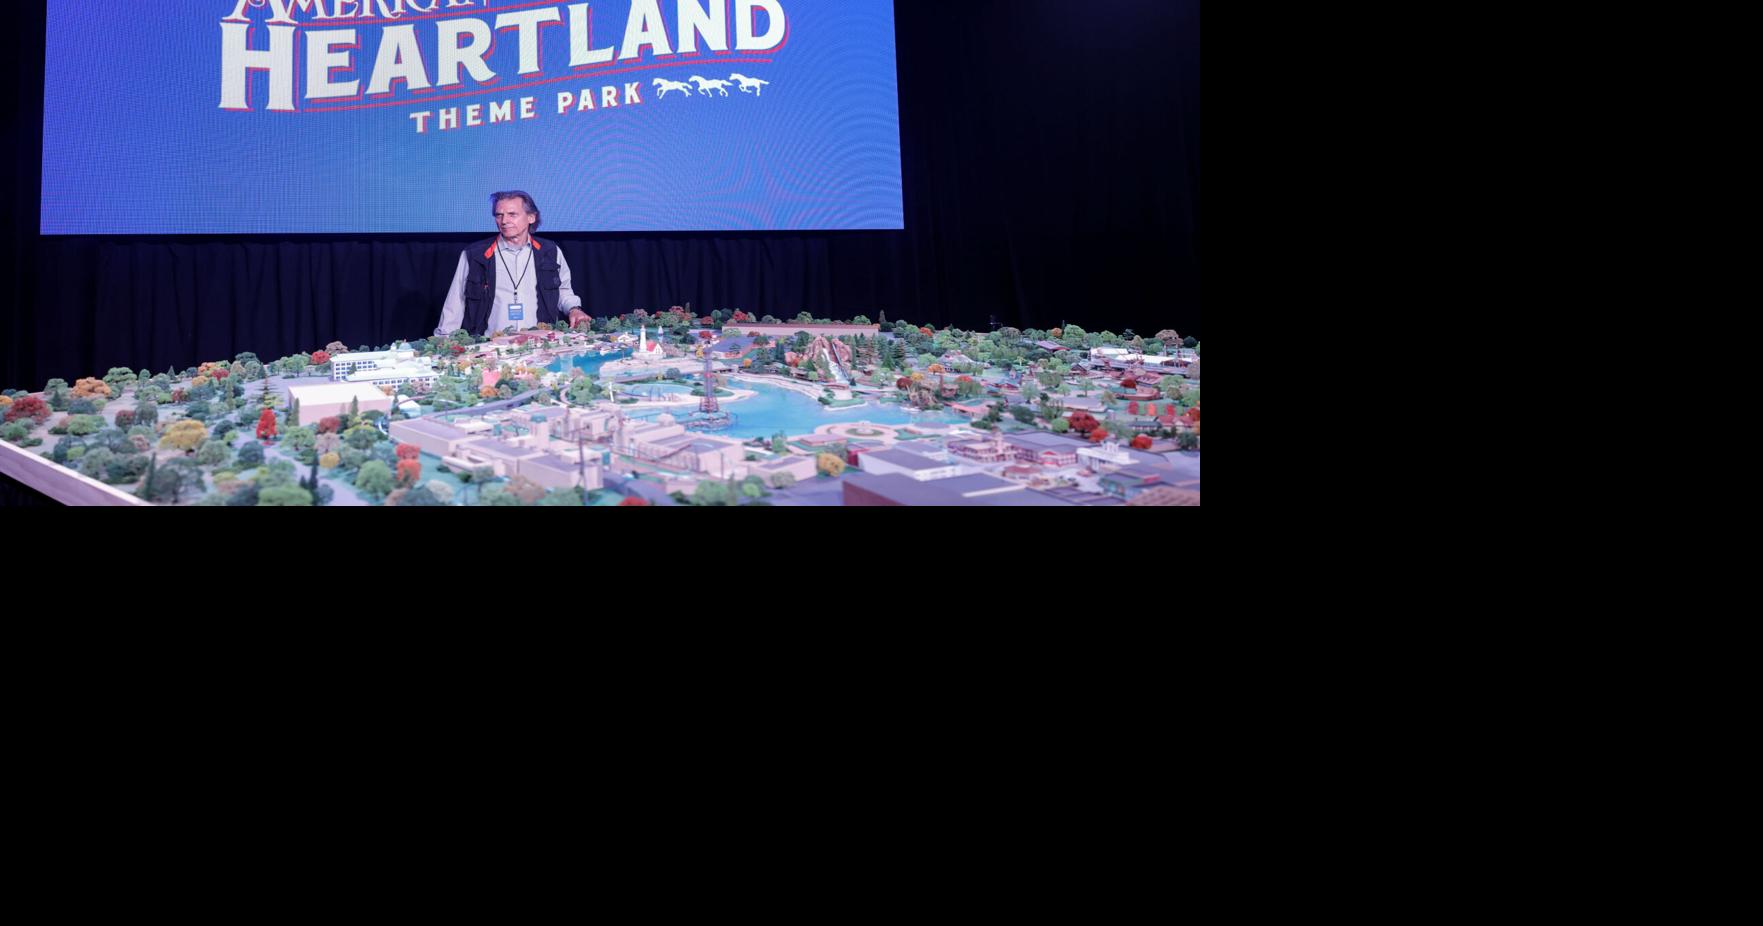 NEW American Heartland Theme Park Coming To Oklahoma, USA In 2026 